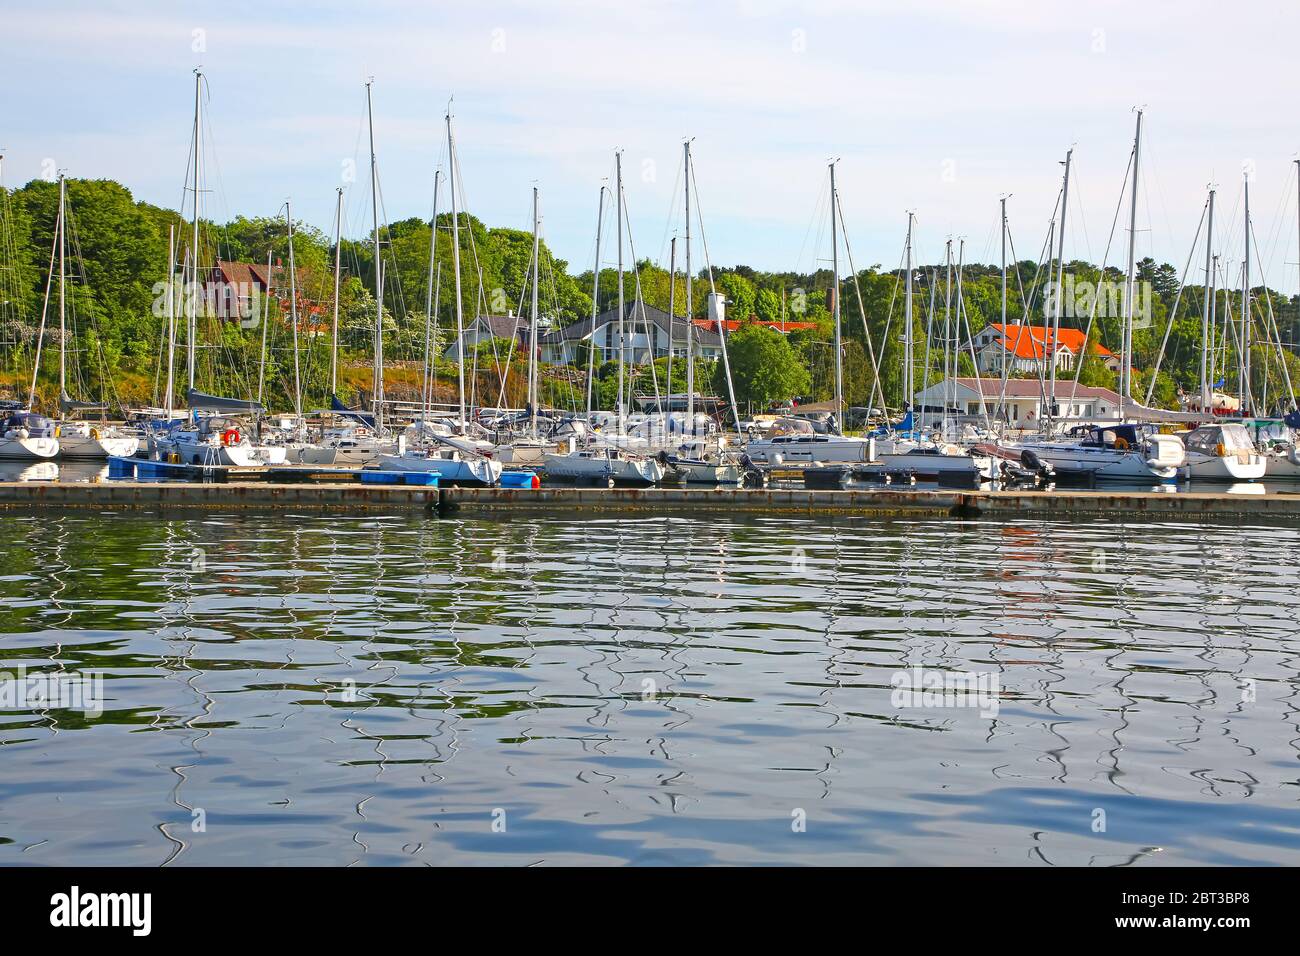 Stavanger Gjestehavn marina with lots of boats & yachts  in the water, and trees in the background, Stavanger, Rogaland county, Norway. Stock Photo